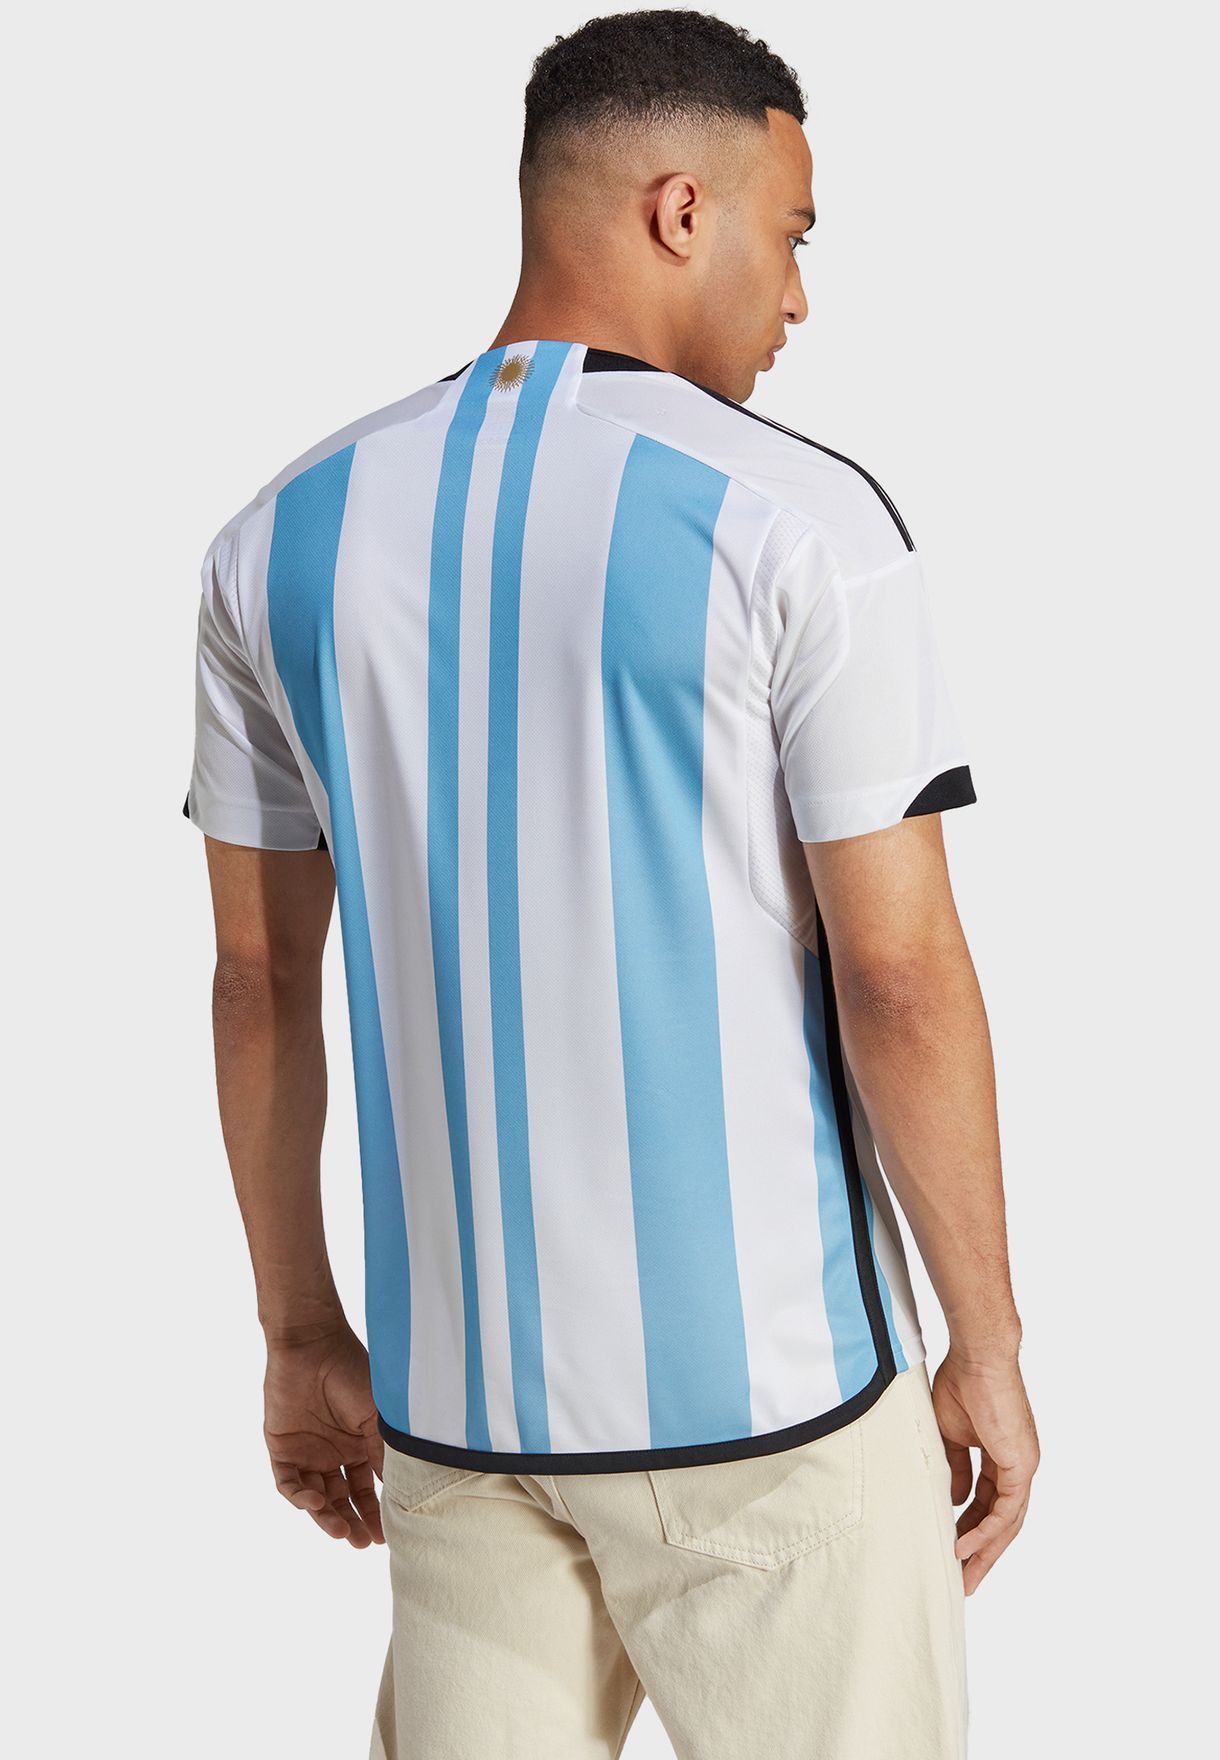 Argentina Home Jersey